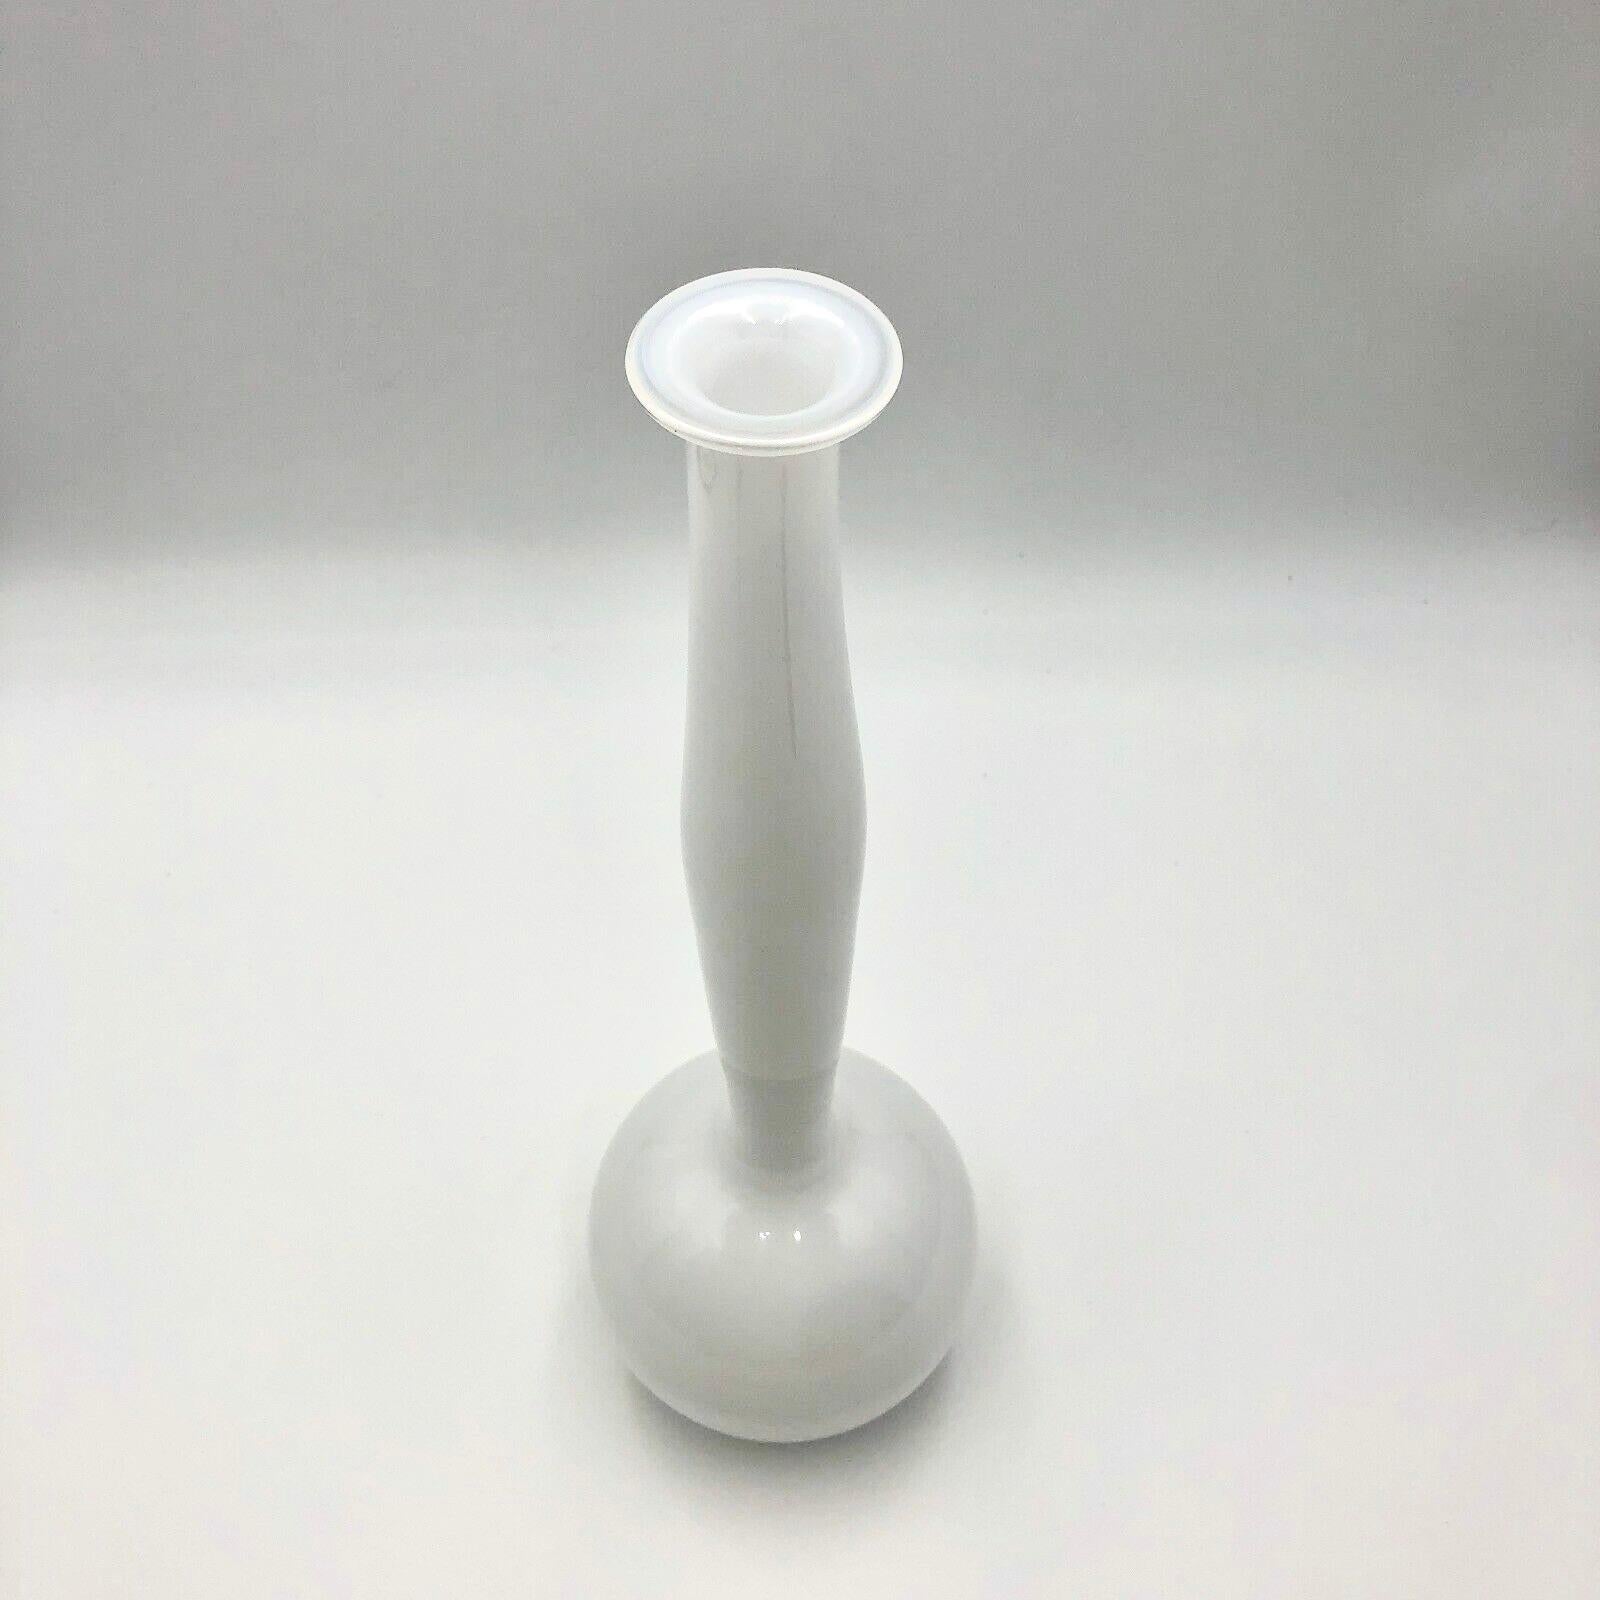 Rare signed and numbered Anne Nilsson for Orrefors Expo 1998 white glass vase.  This beautifully crafted clear and white glass vase is approximately 16.5